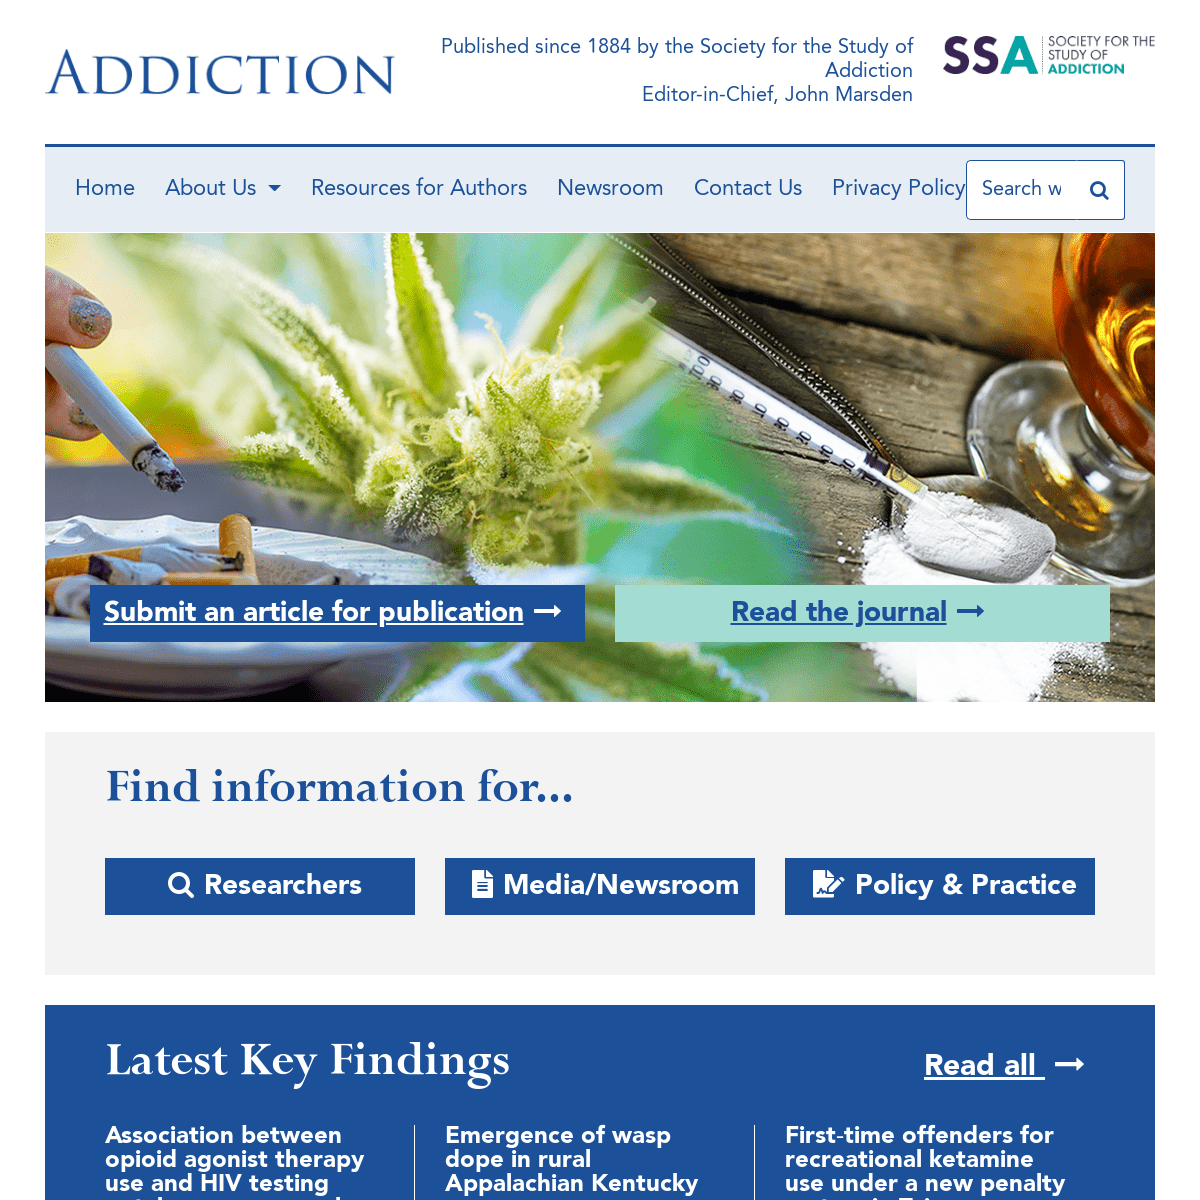 A complete backup of https://addictionjournal.org